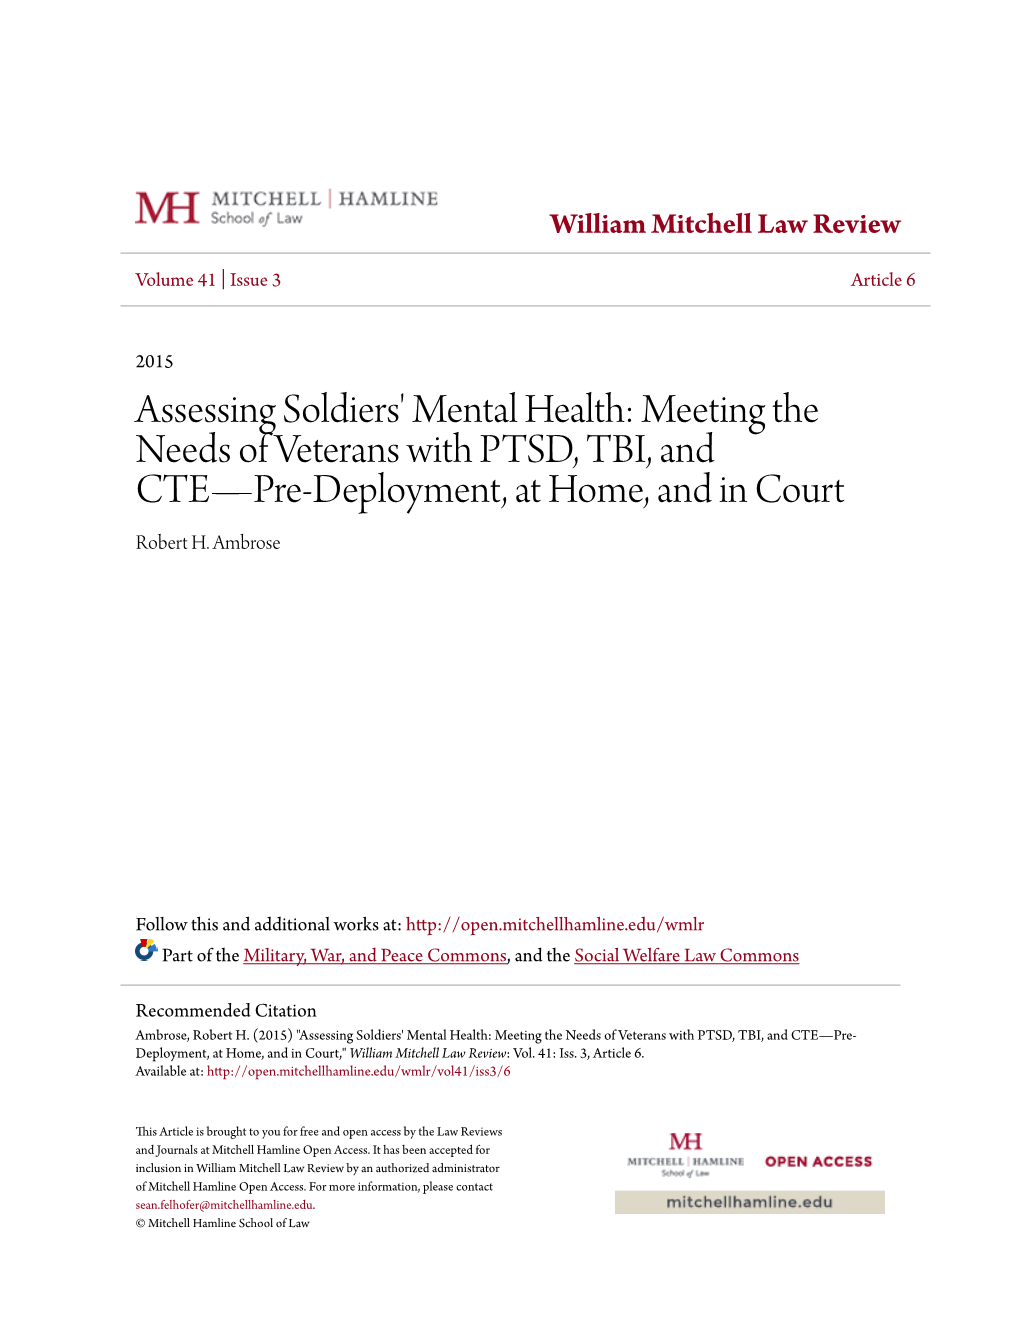 Assessing Soldiers' Mental Health: Meeting the Needs of Veterans with PTSD, TBI, and CTE—Pre-Deployment, at Home, and in Court Robert H